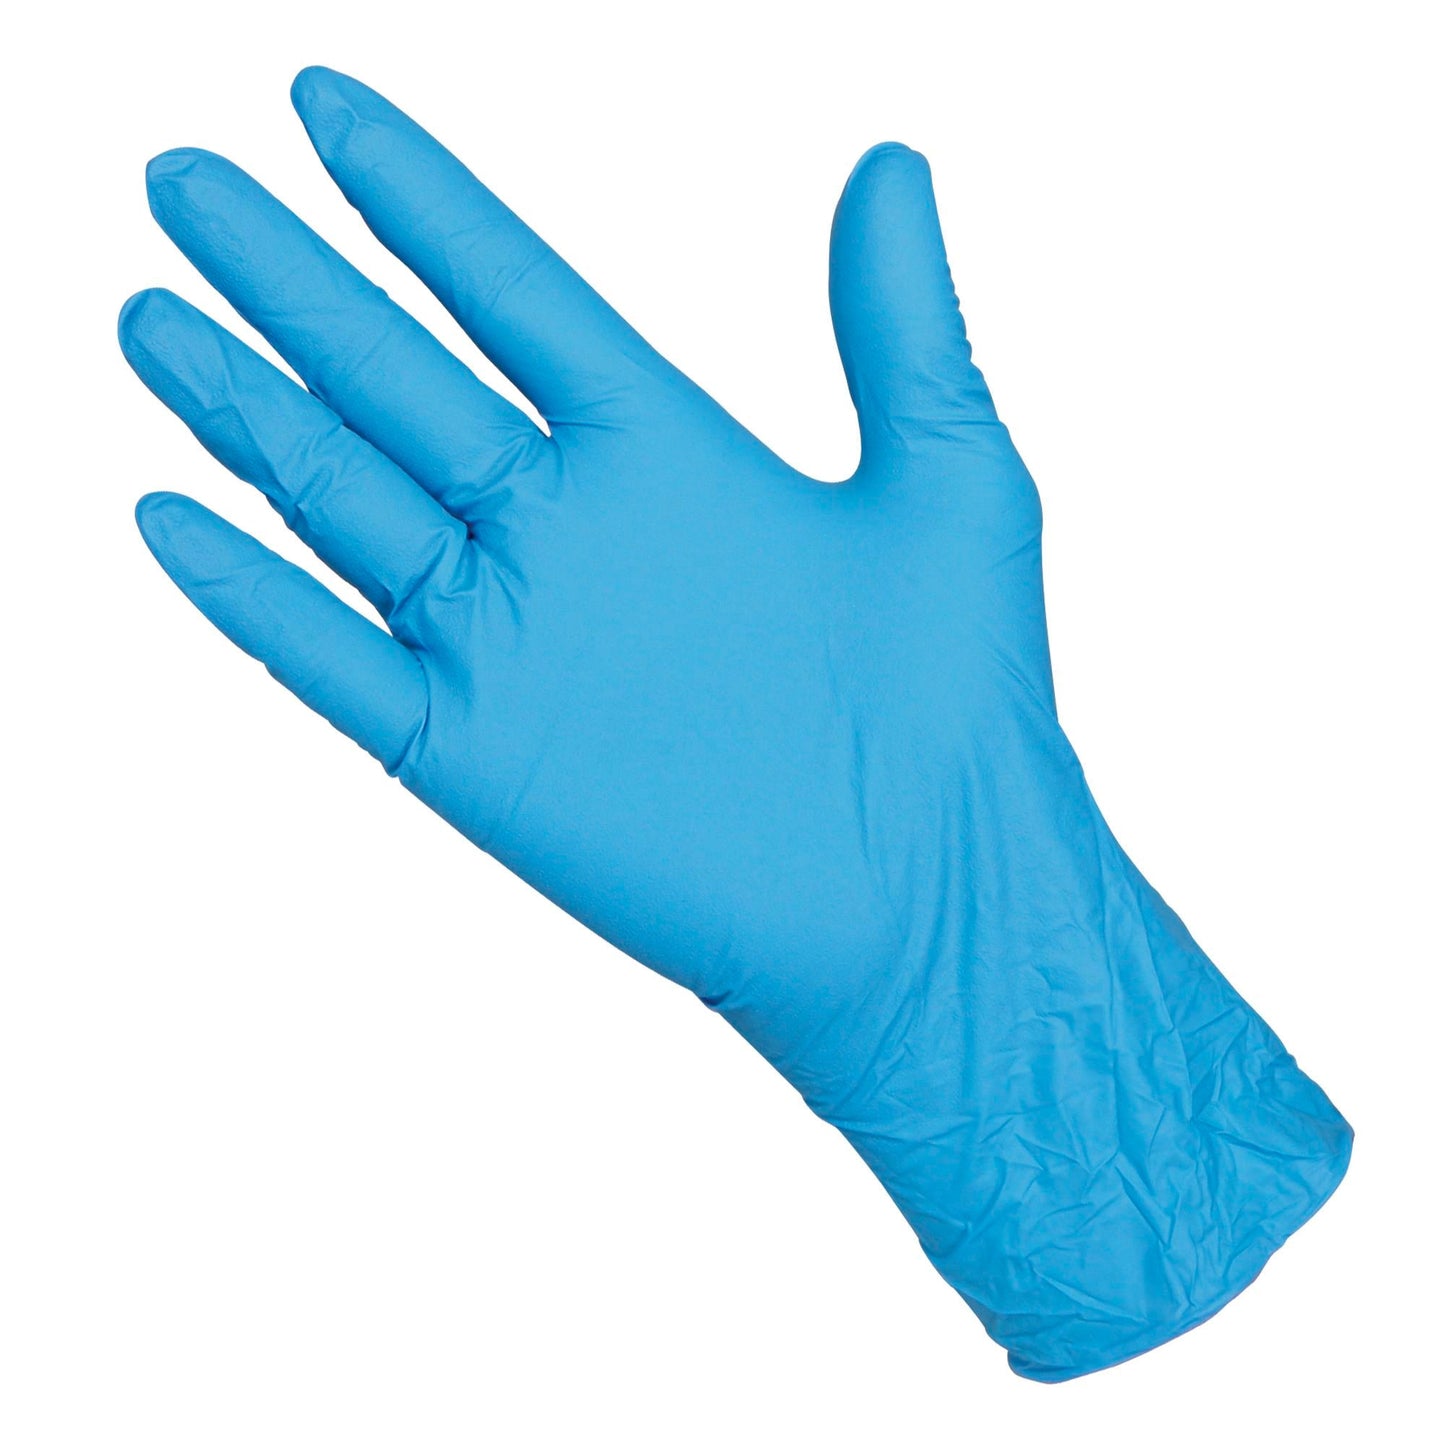 Blue Nitrile Gloves (Medical) Product Image in another angle